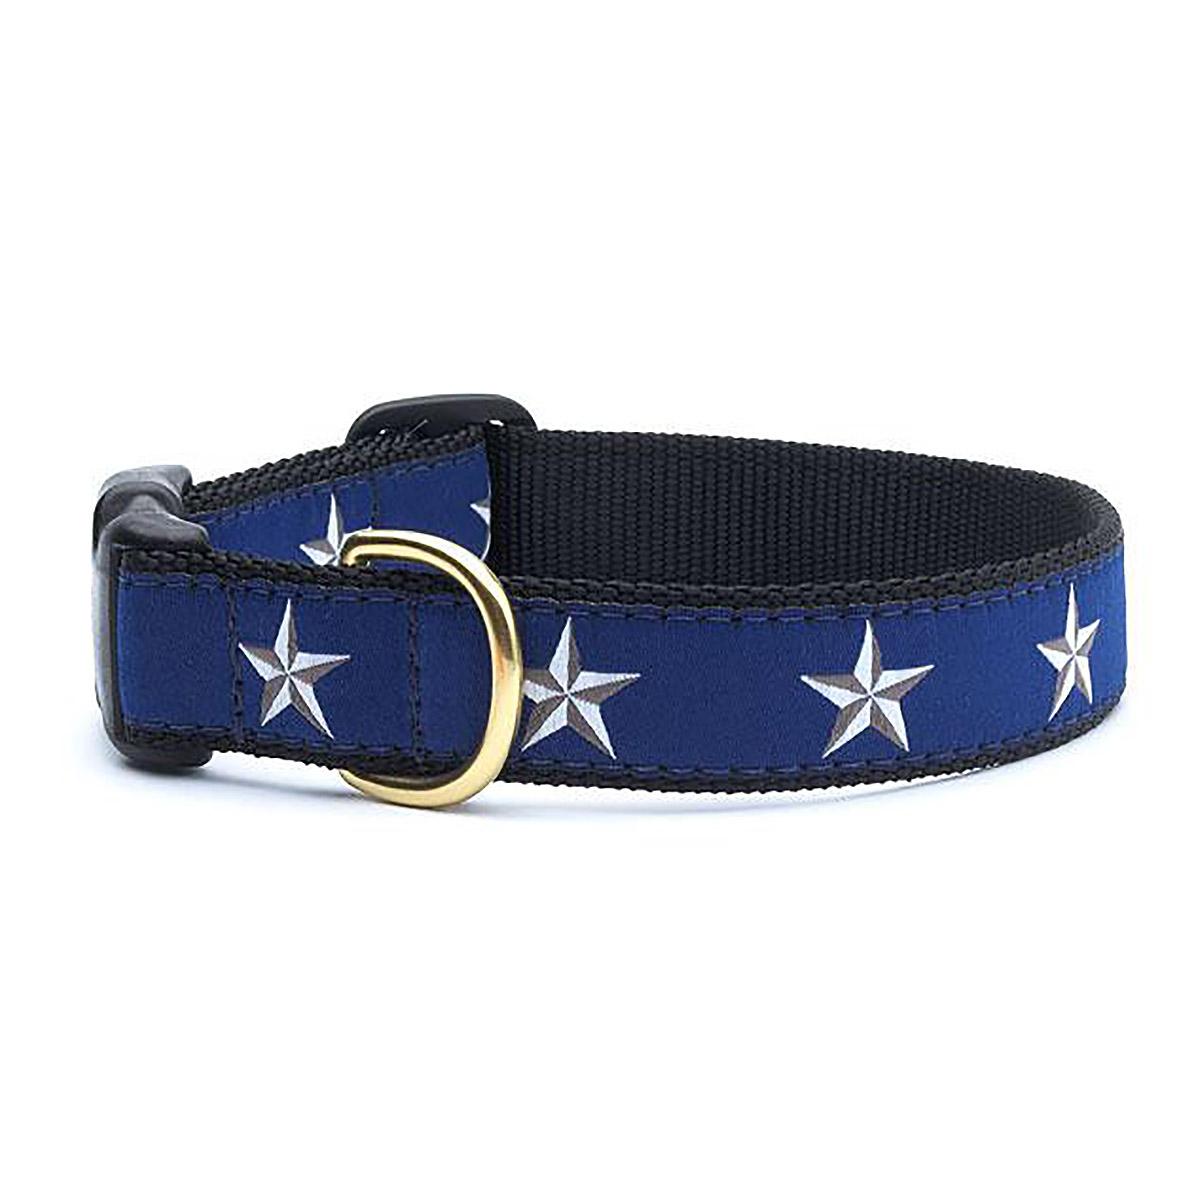 North Star Dog Collar by Up Country